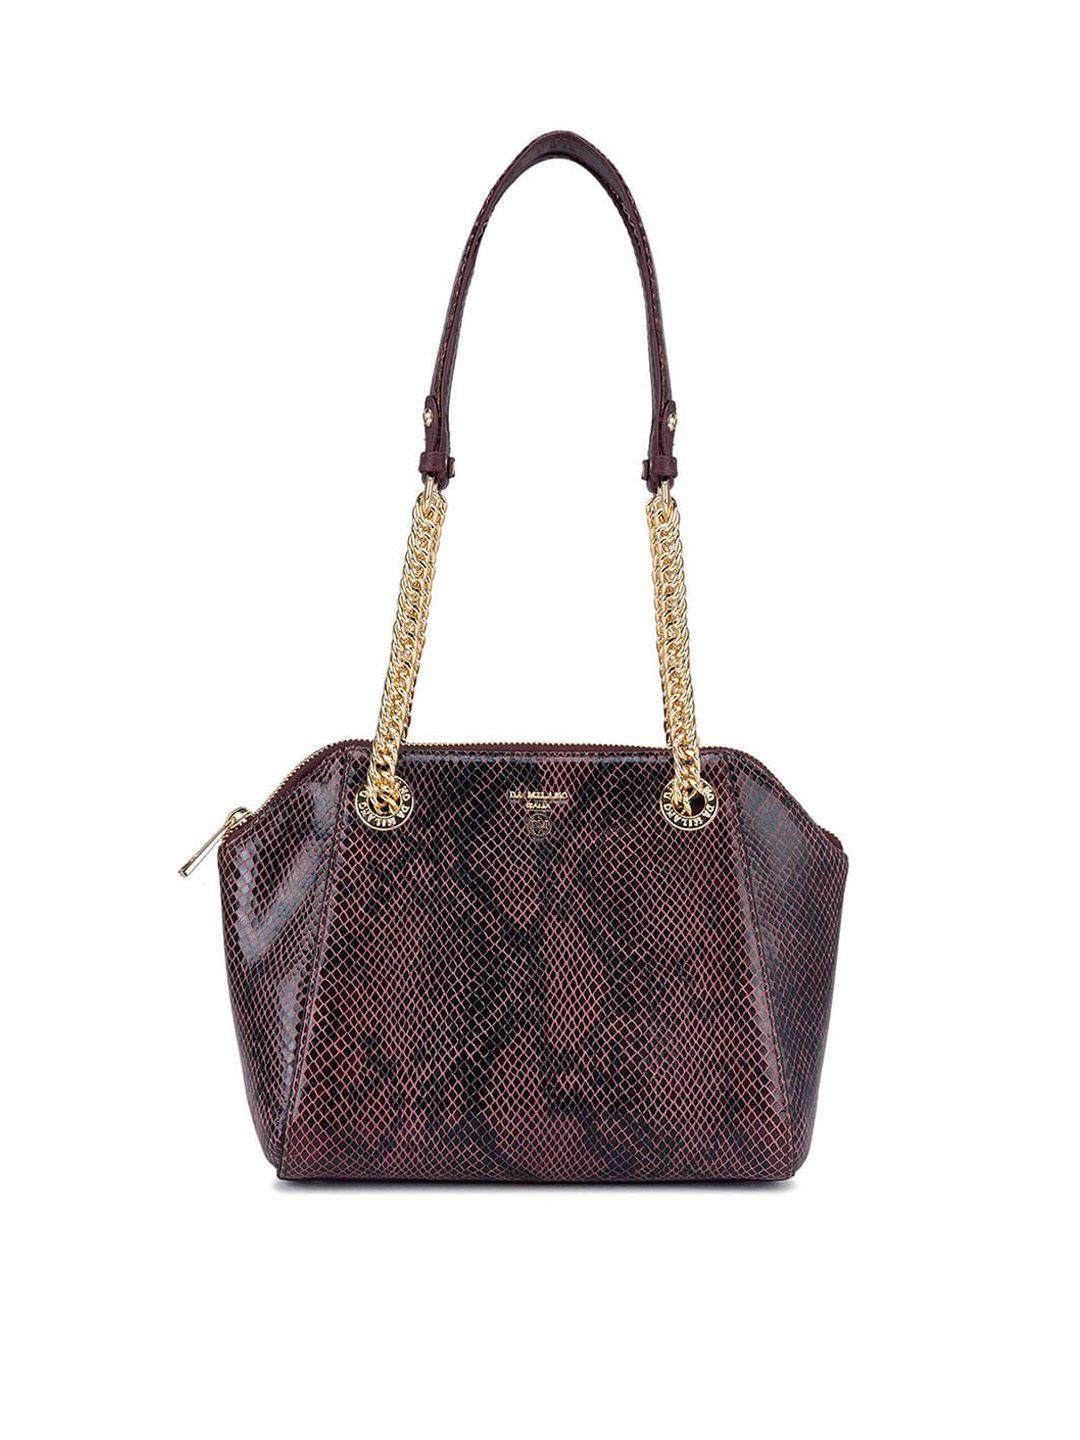 da milano maroon animal textured leather structured shoulder bag with tasselled